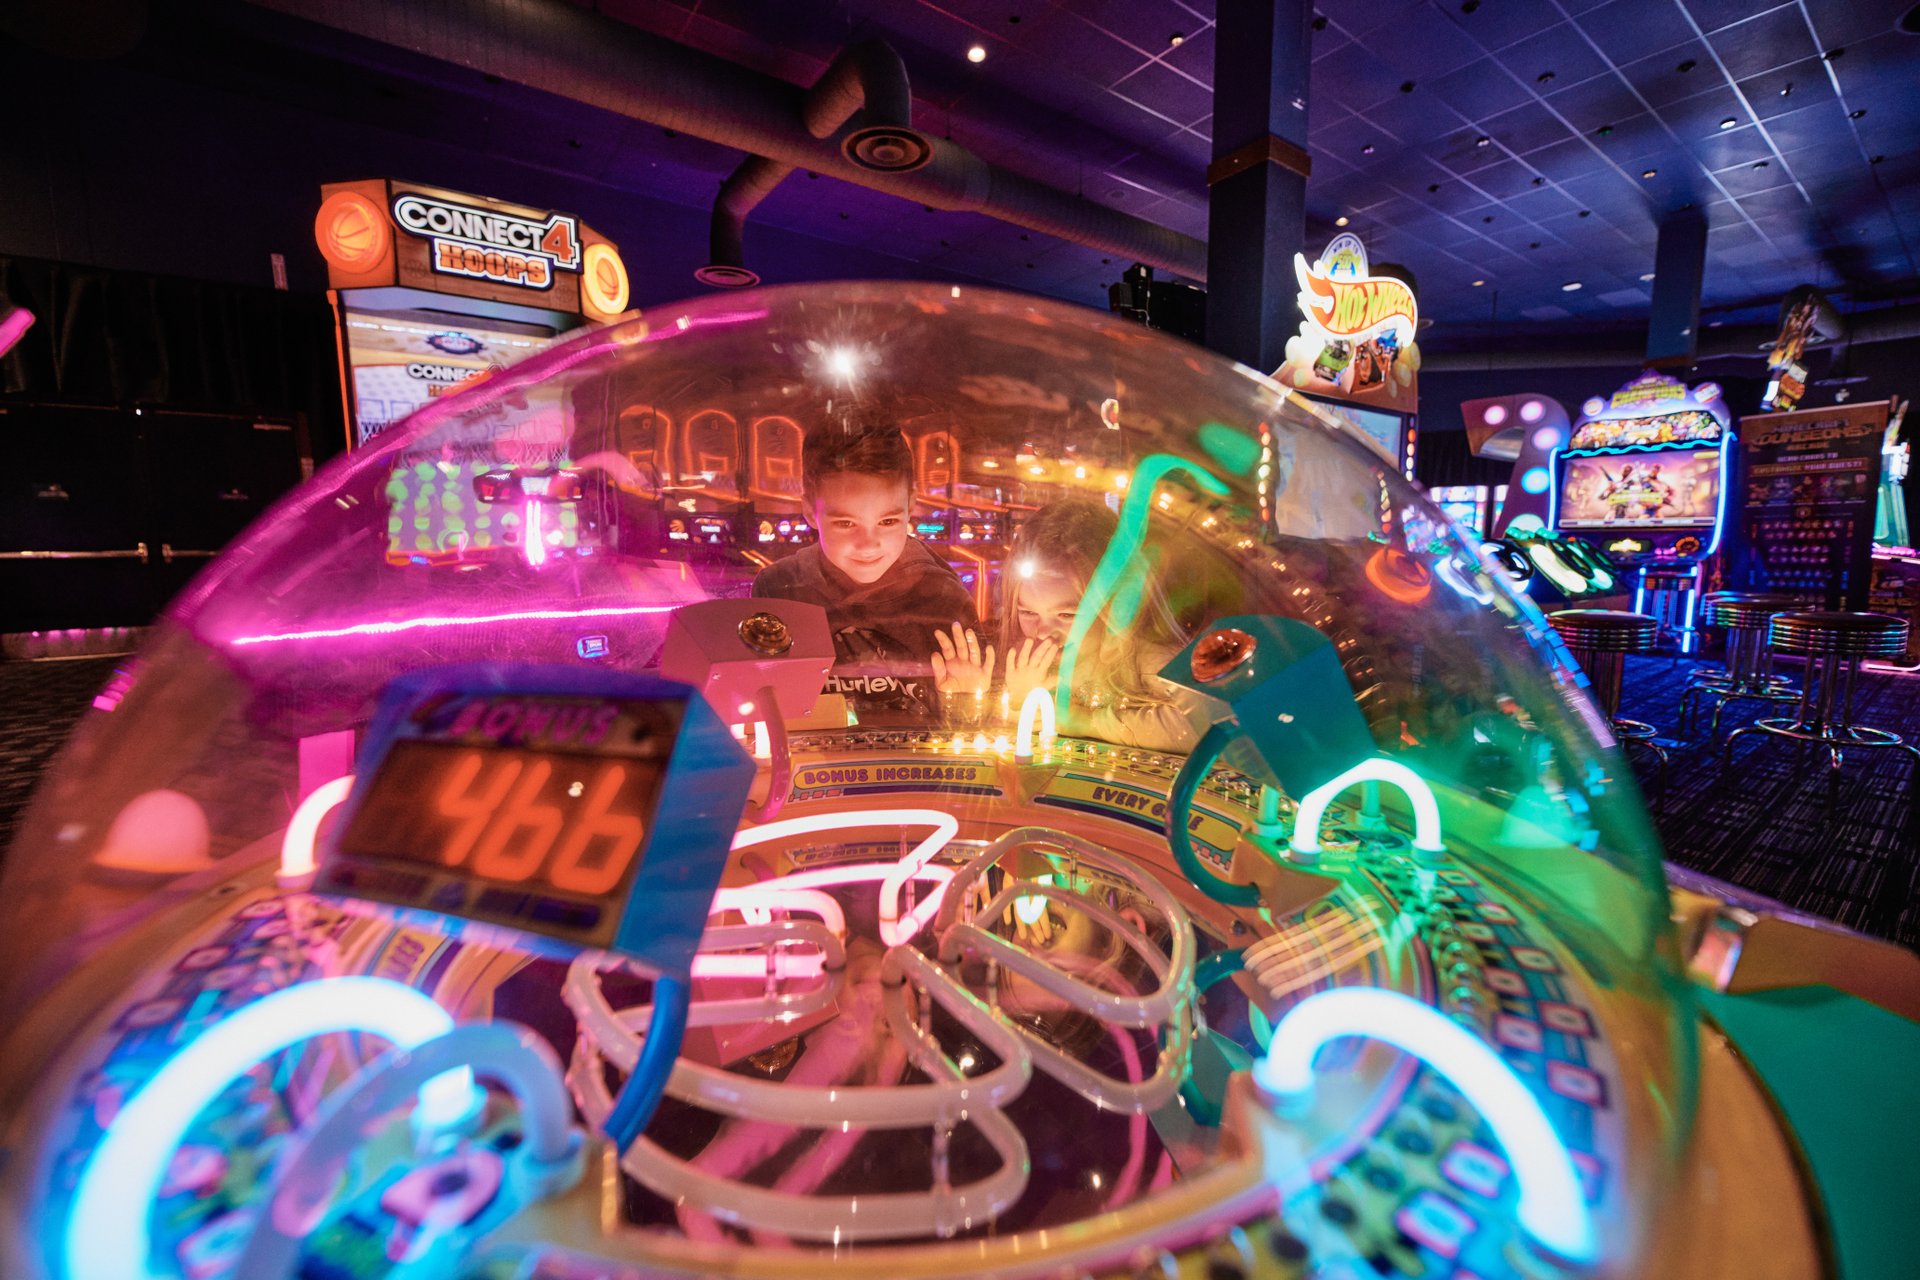 Dave and Buster's in Vaughan